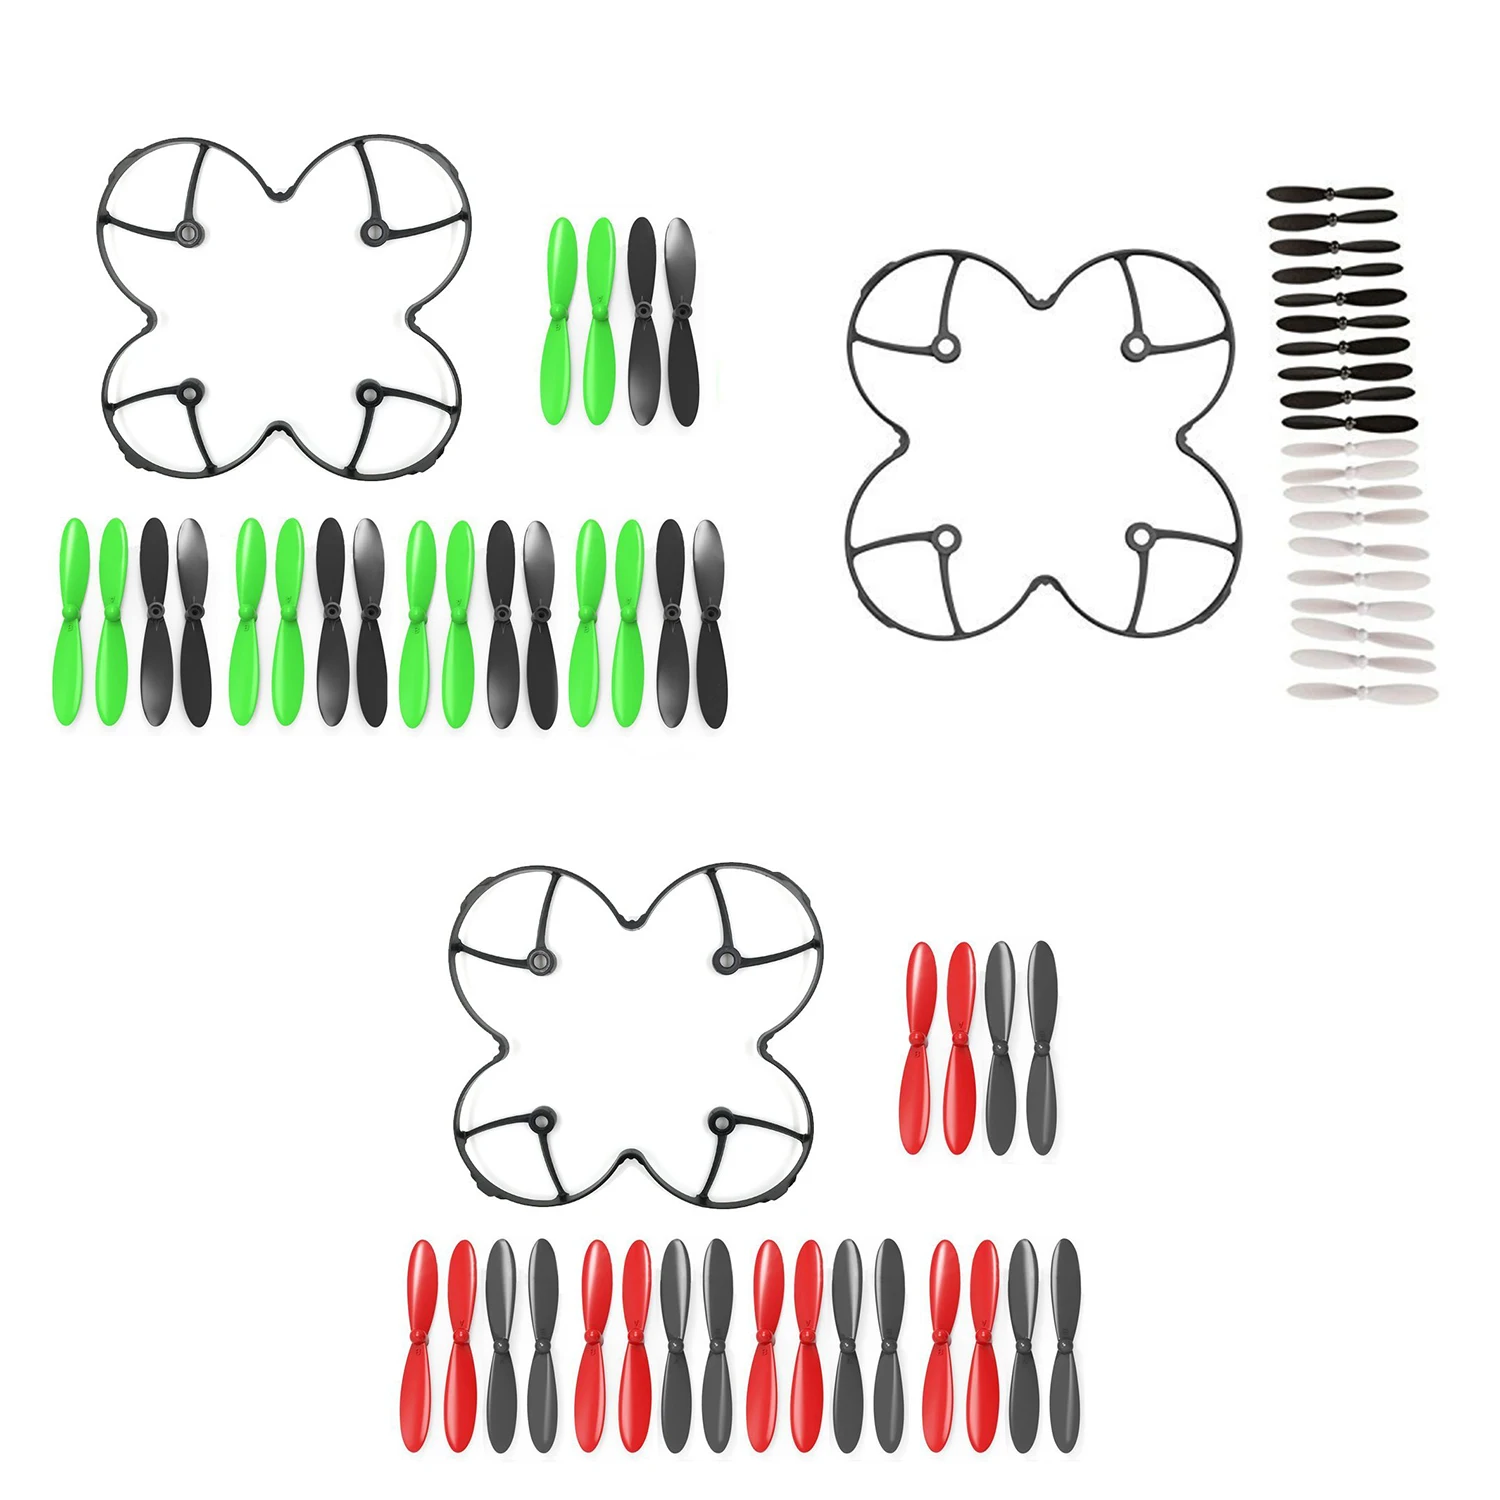 

HOT SALE 20 Piece Set Propeller Blades With Helices Protective Cover For HUBSAN X4 H107 H107C H107D Quadcopter, Black+White